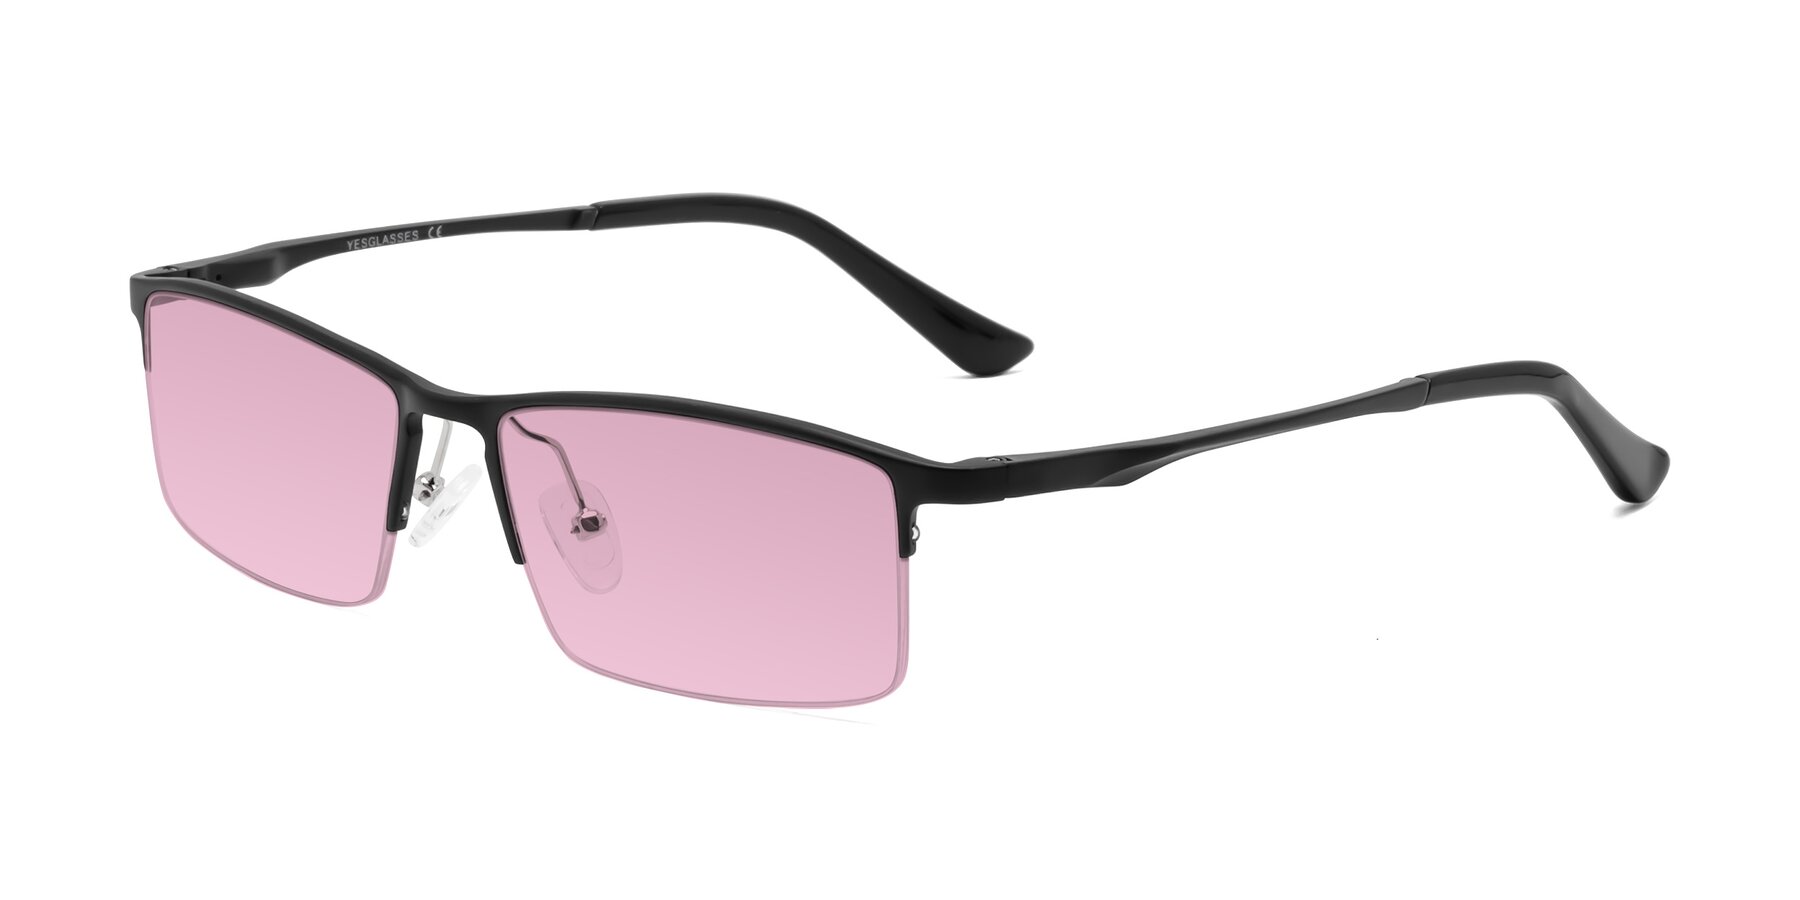 Angle of CX6263 in Black with Light Wine Tinted Lenses